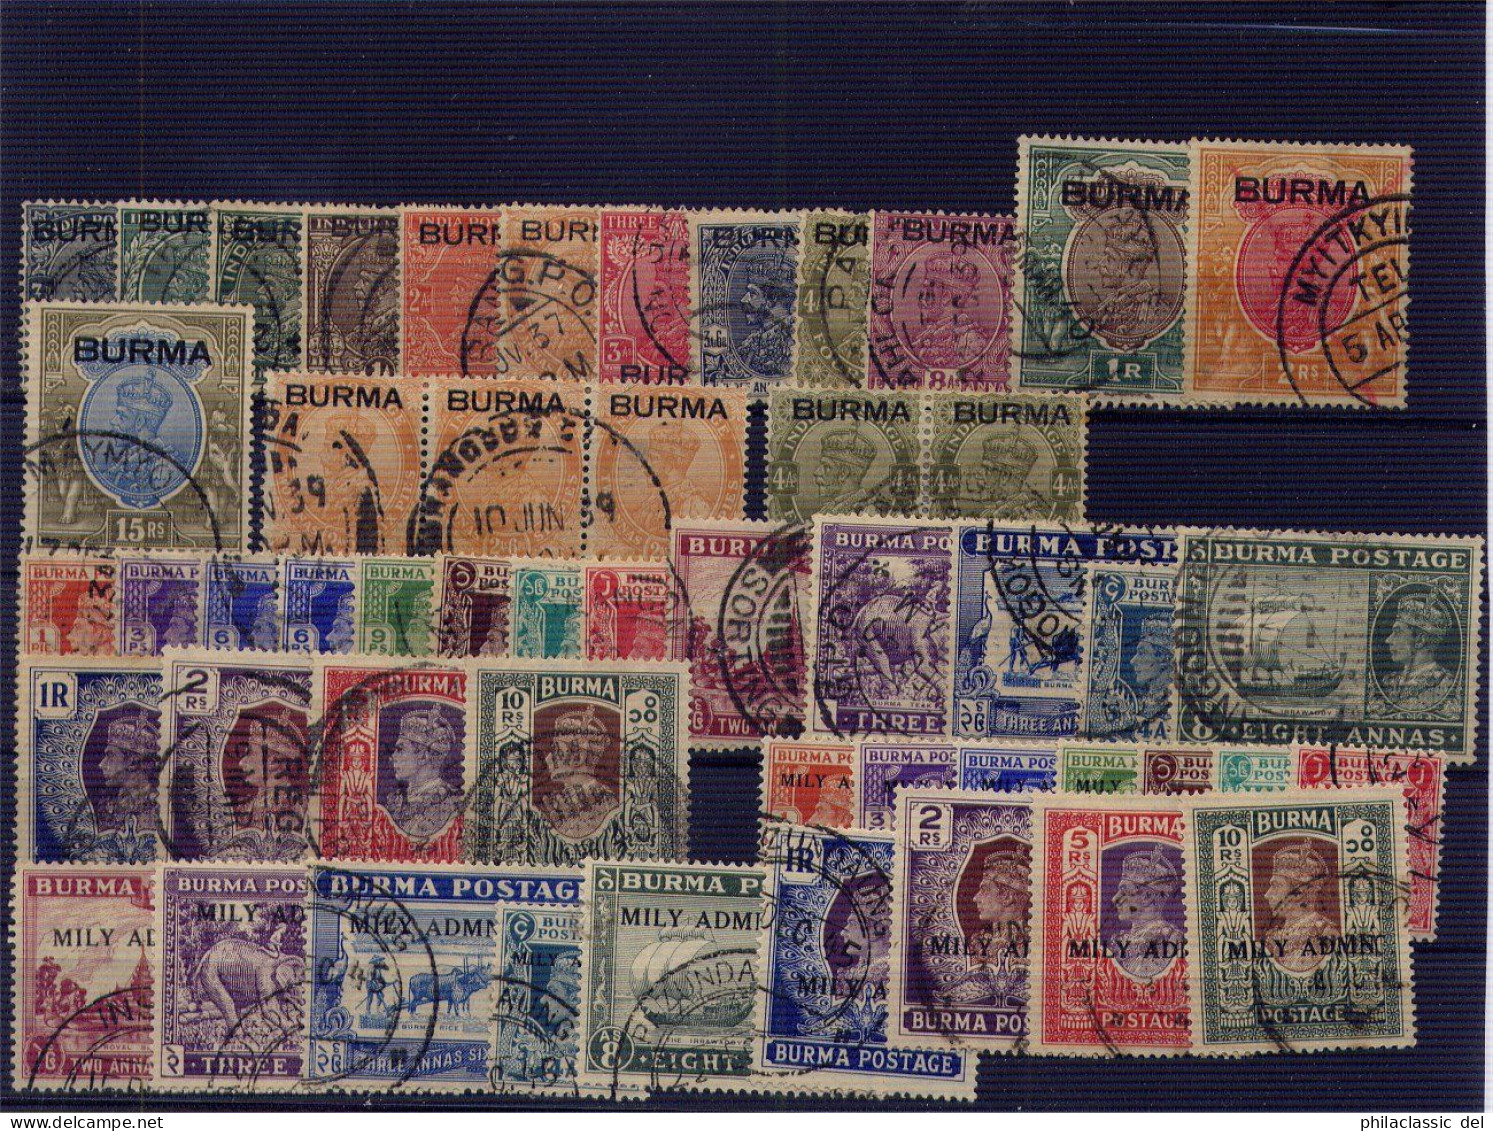 BURMA 1938 - 1954, Very Nice Nearly Complete Collection Fine Cancelled Cat Val 1150 Pounds - Birmanie (...-1947)